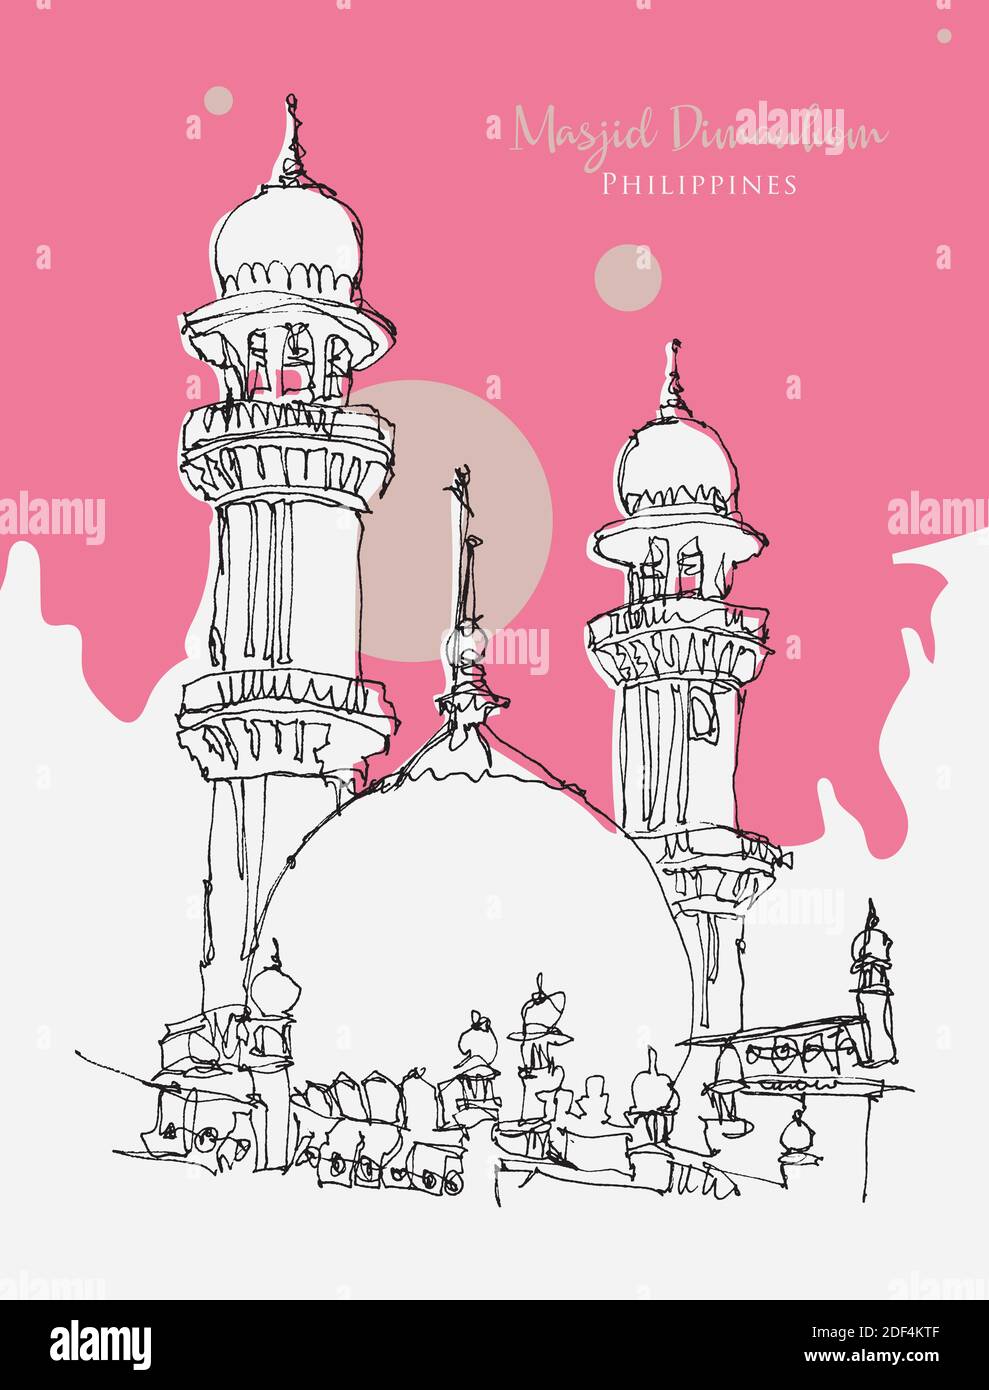 Vector hand drawn sketch illustration of Masjid Dimaukom or the Pink Mosque in the Philippines Stock Vector